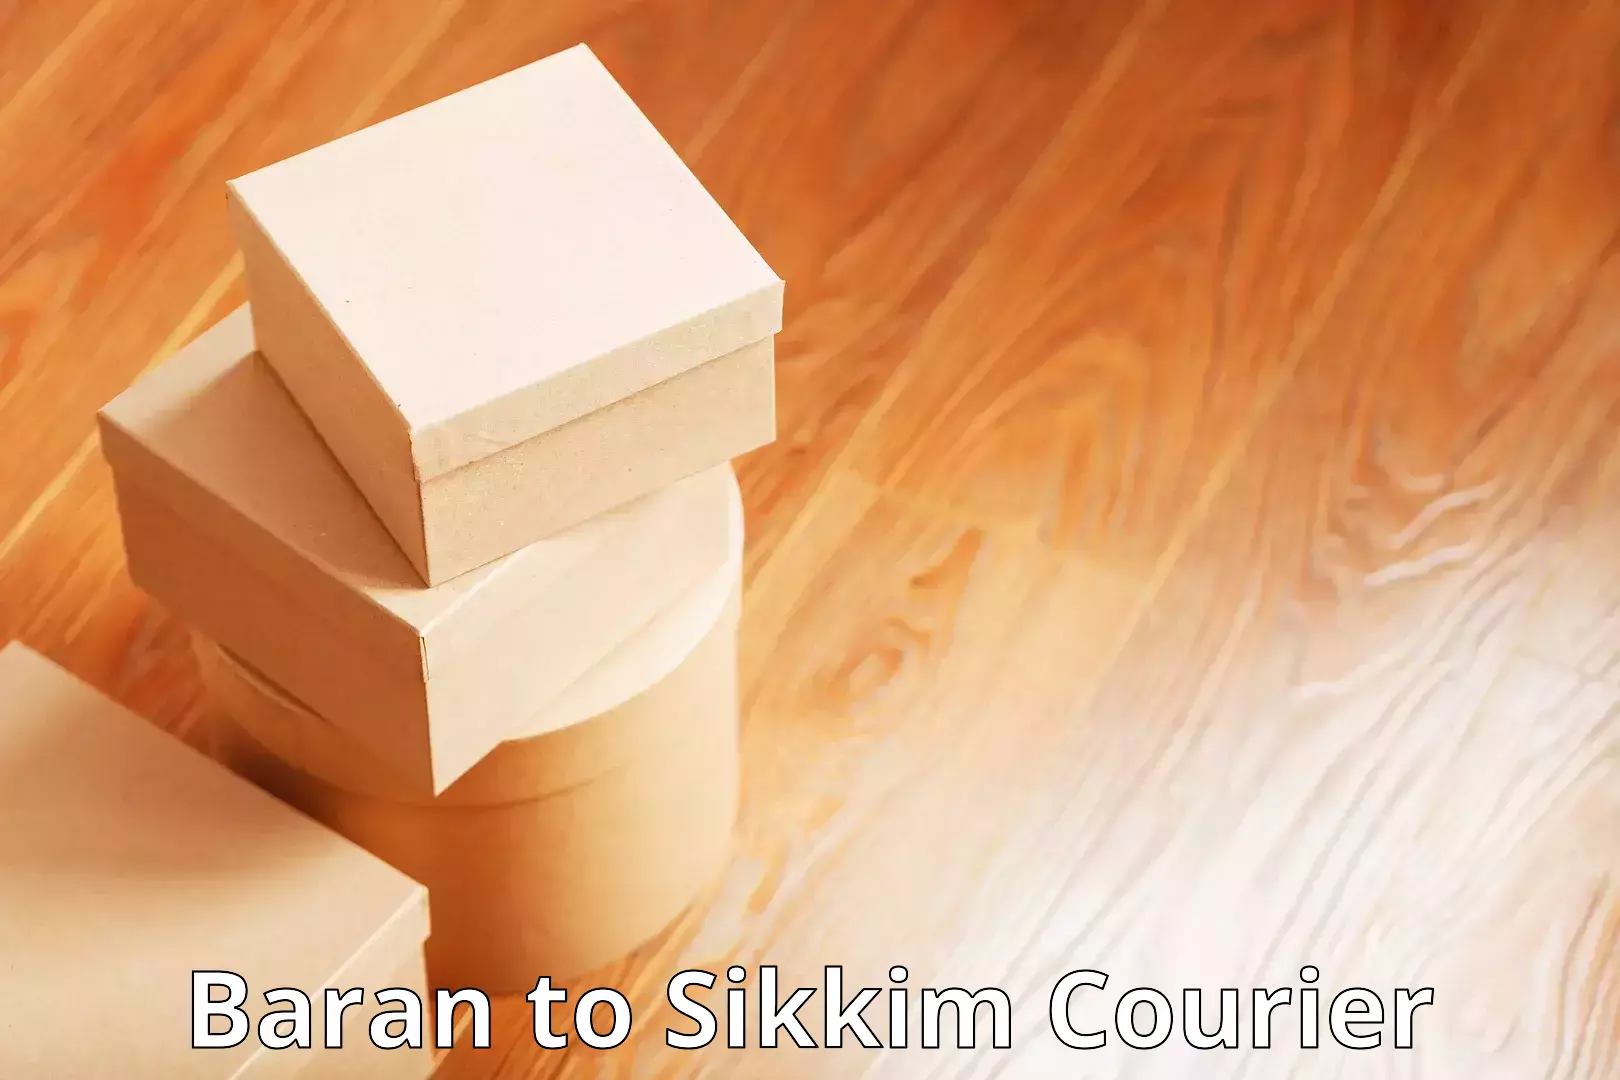 Business delivery service Baran to Sikkim